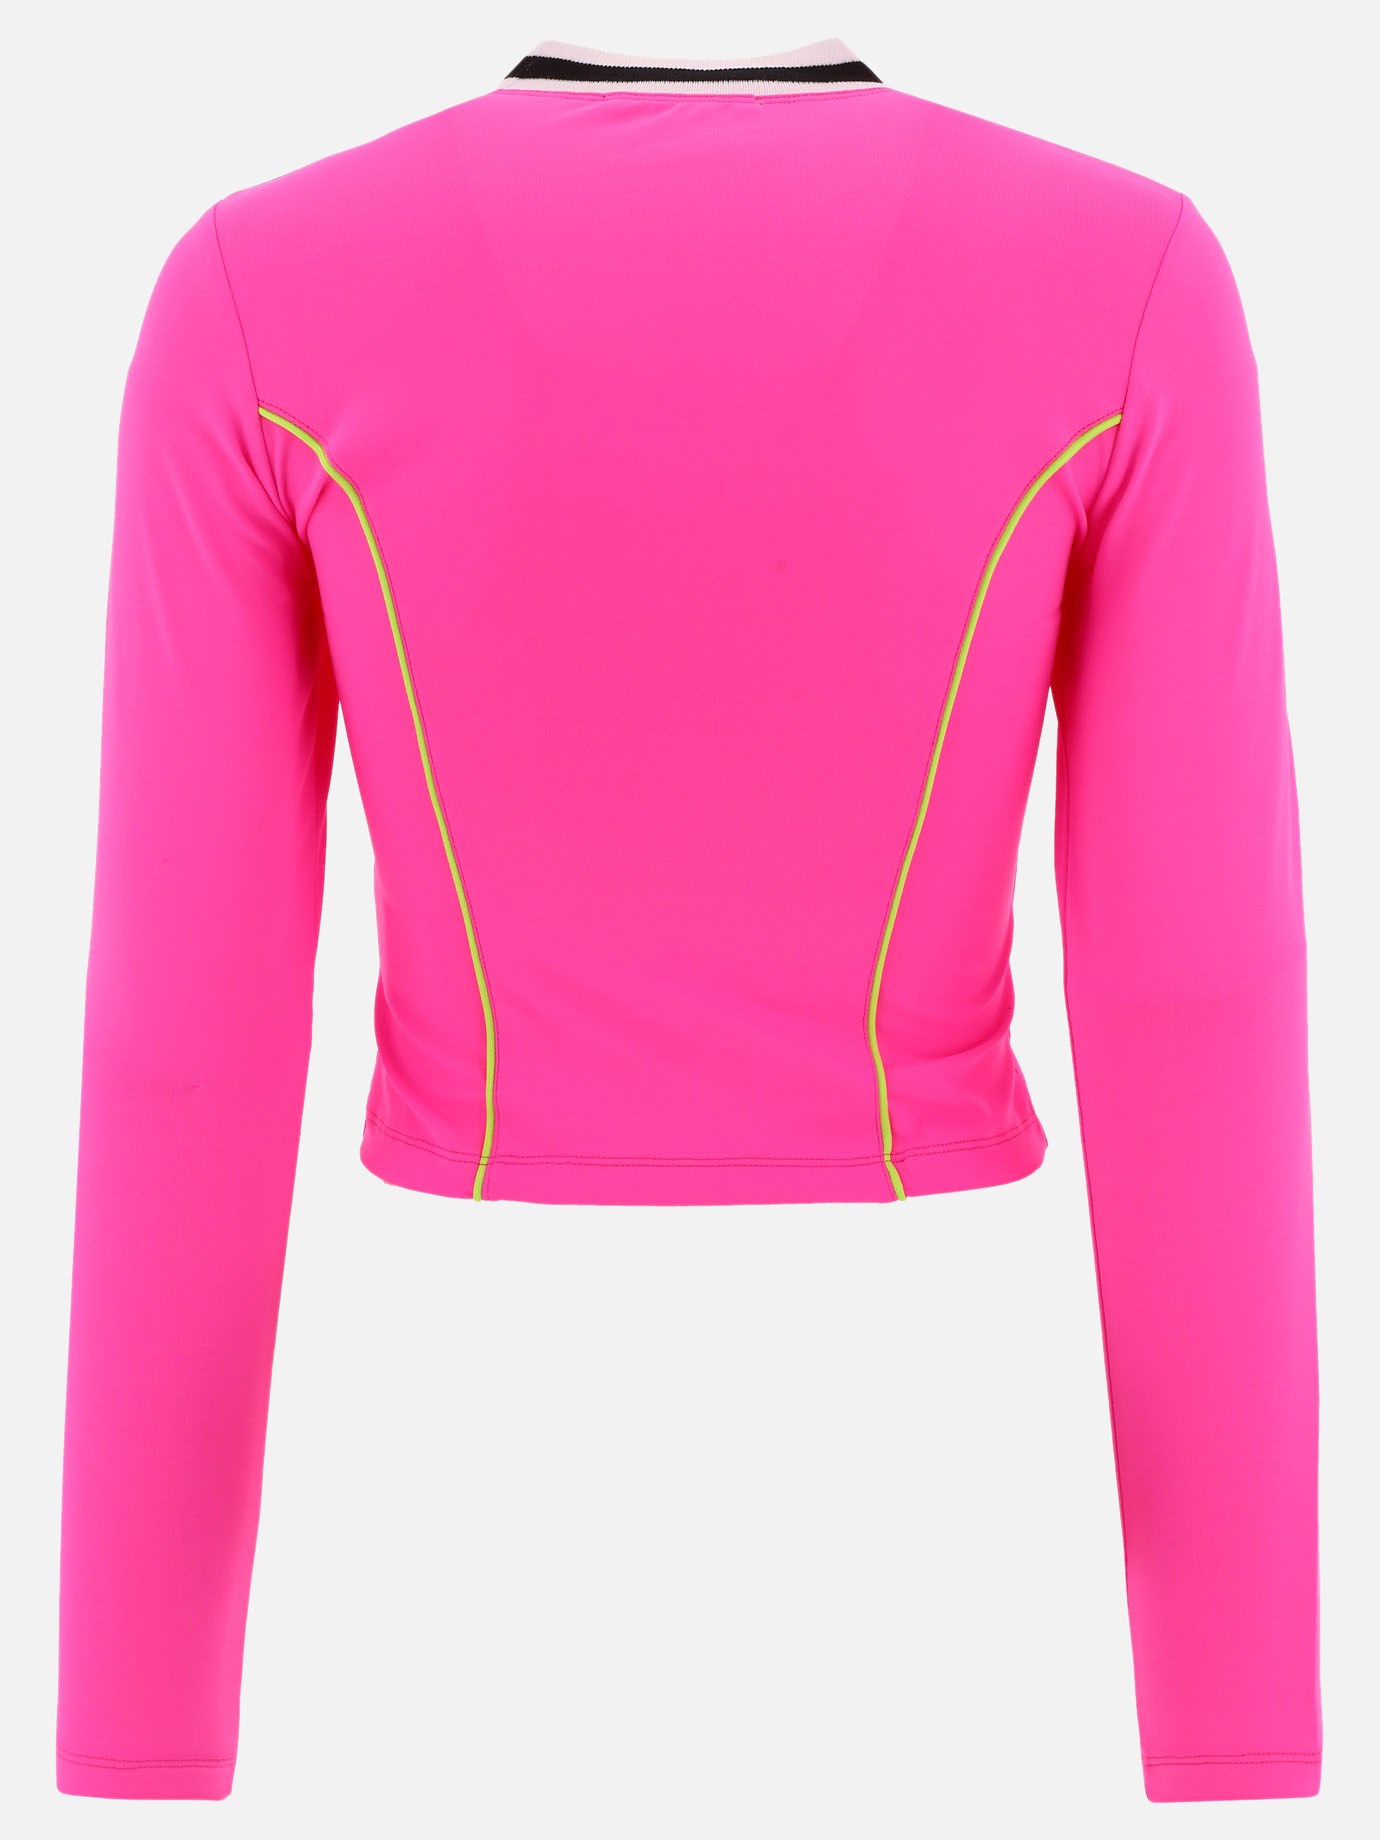  MSGM Active  top by Msgm